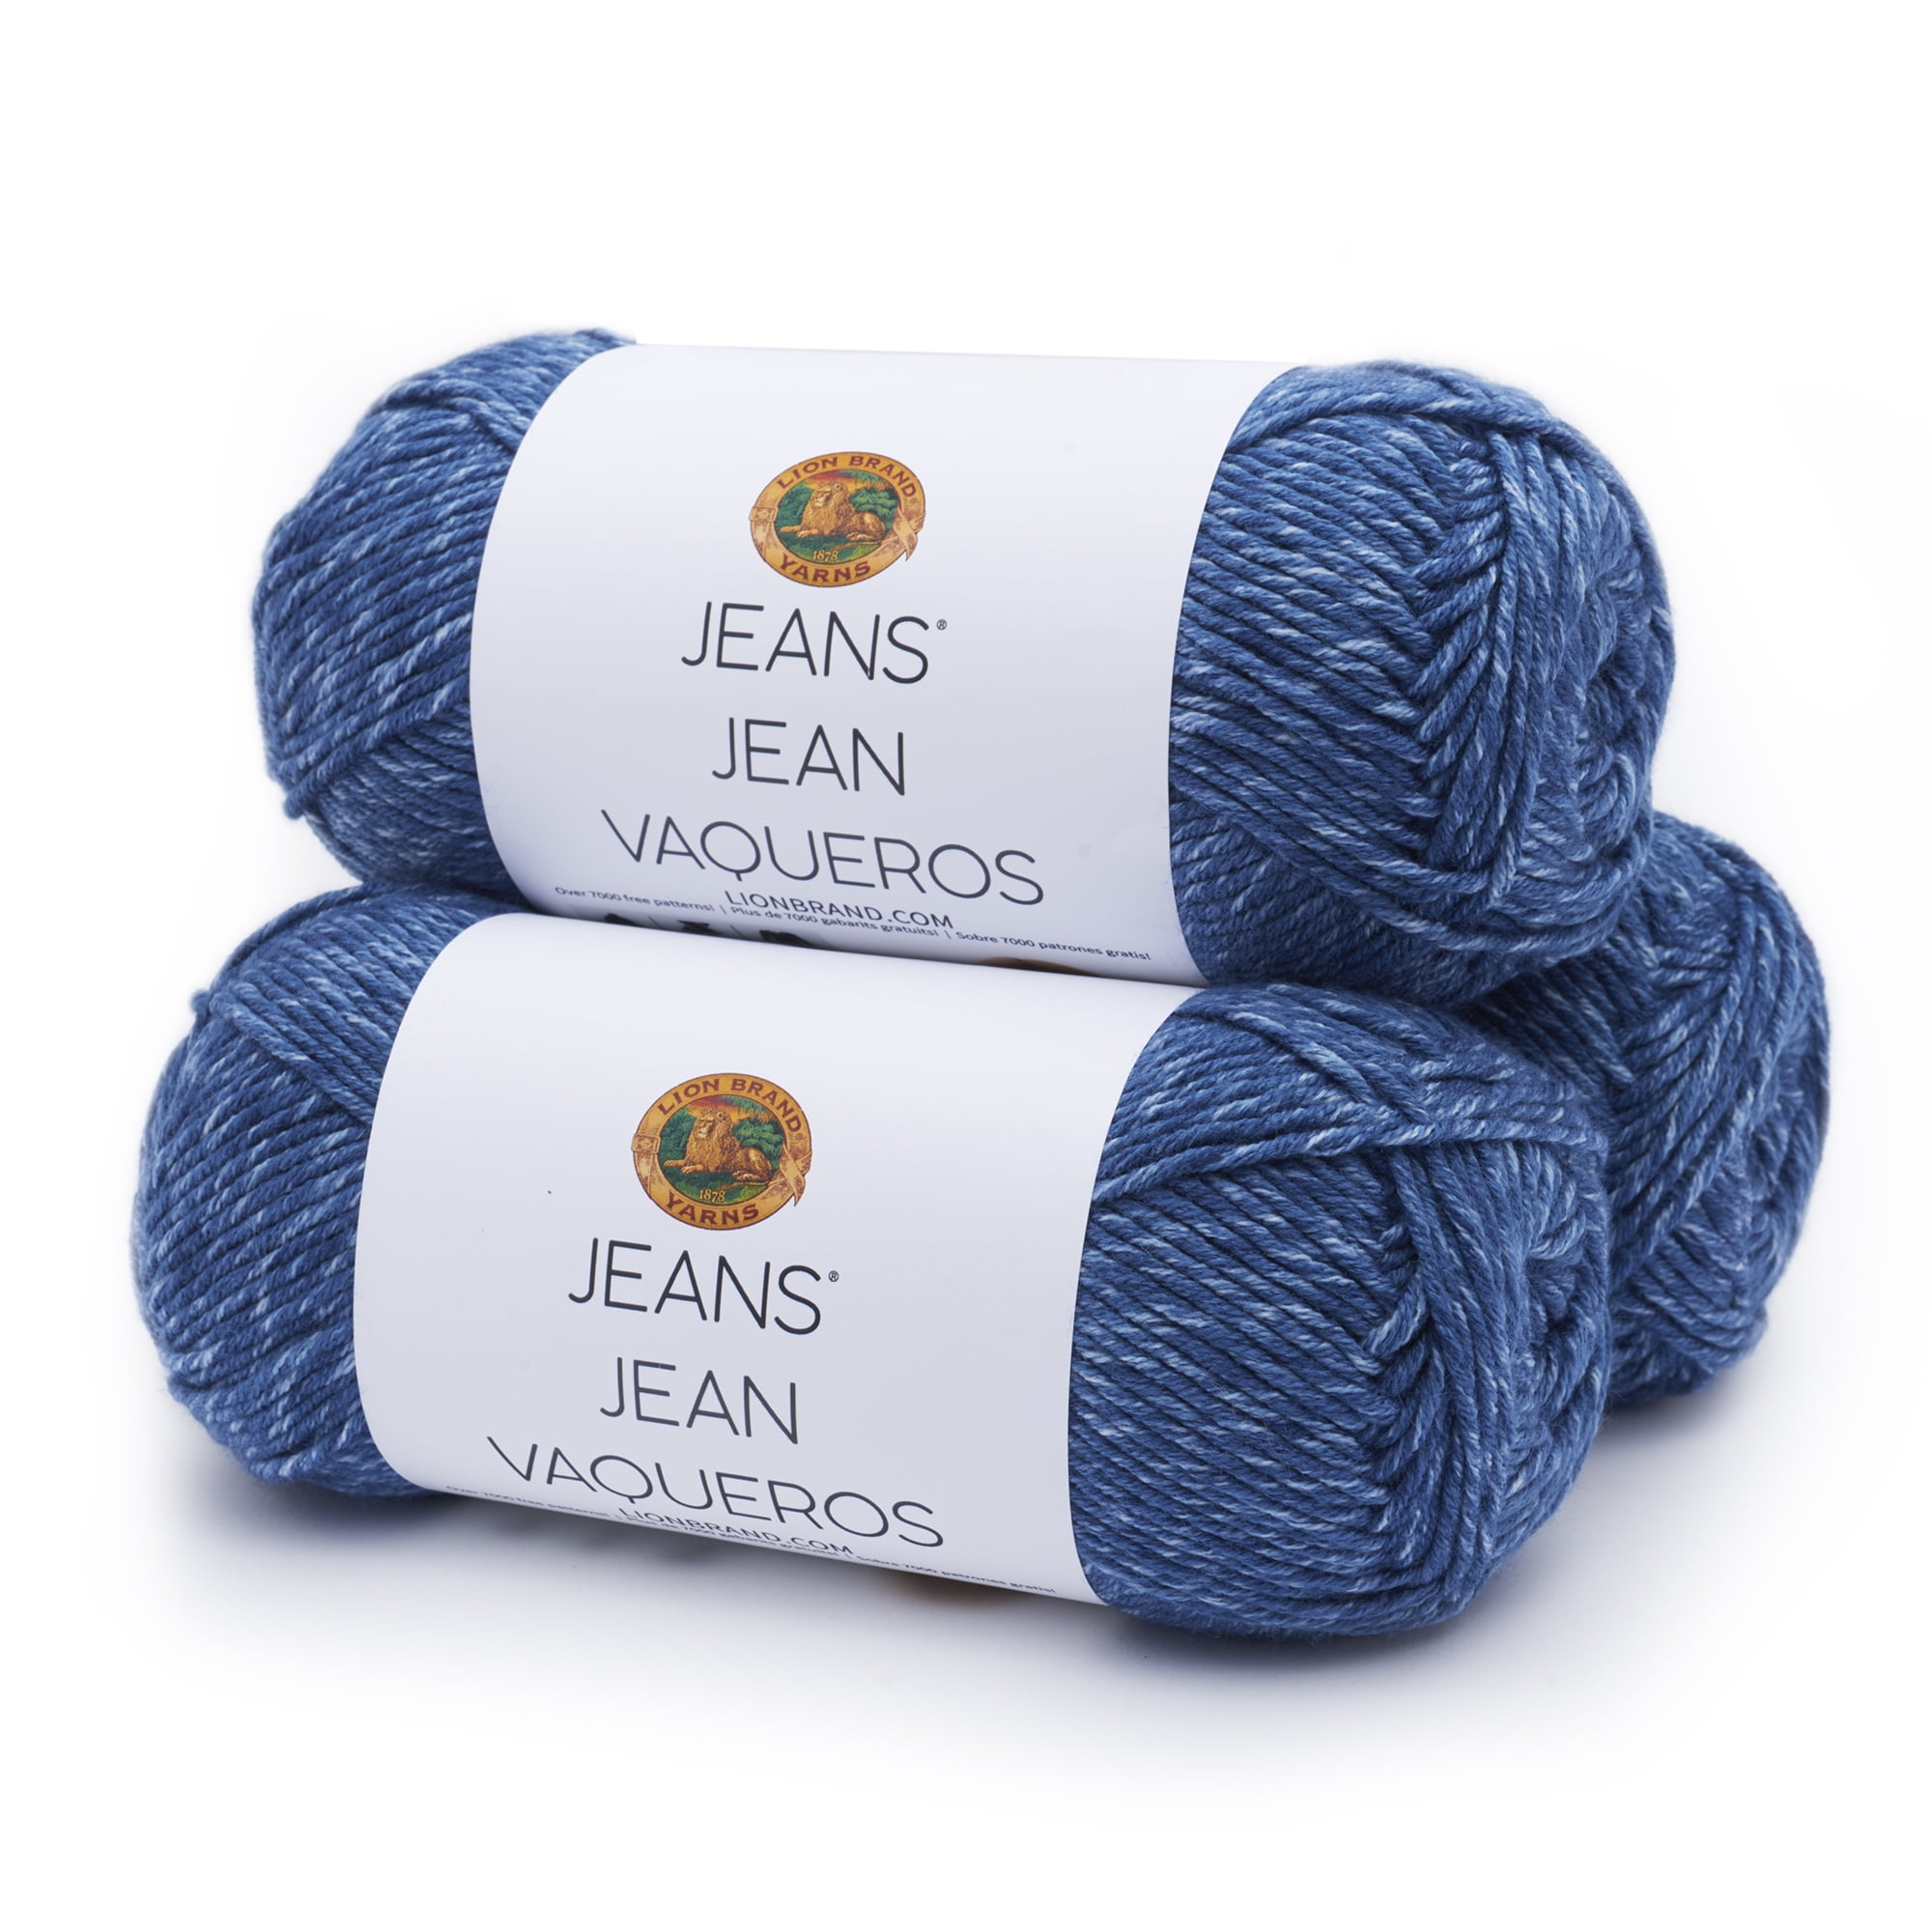 Lion Brand Jeans Review - Budget Yarn Reviews